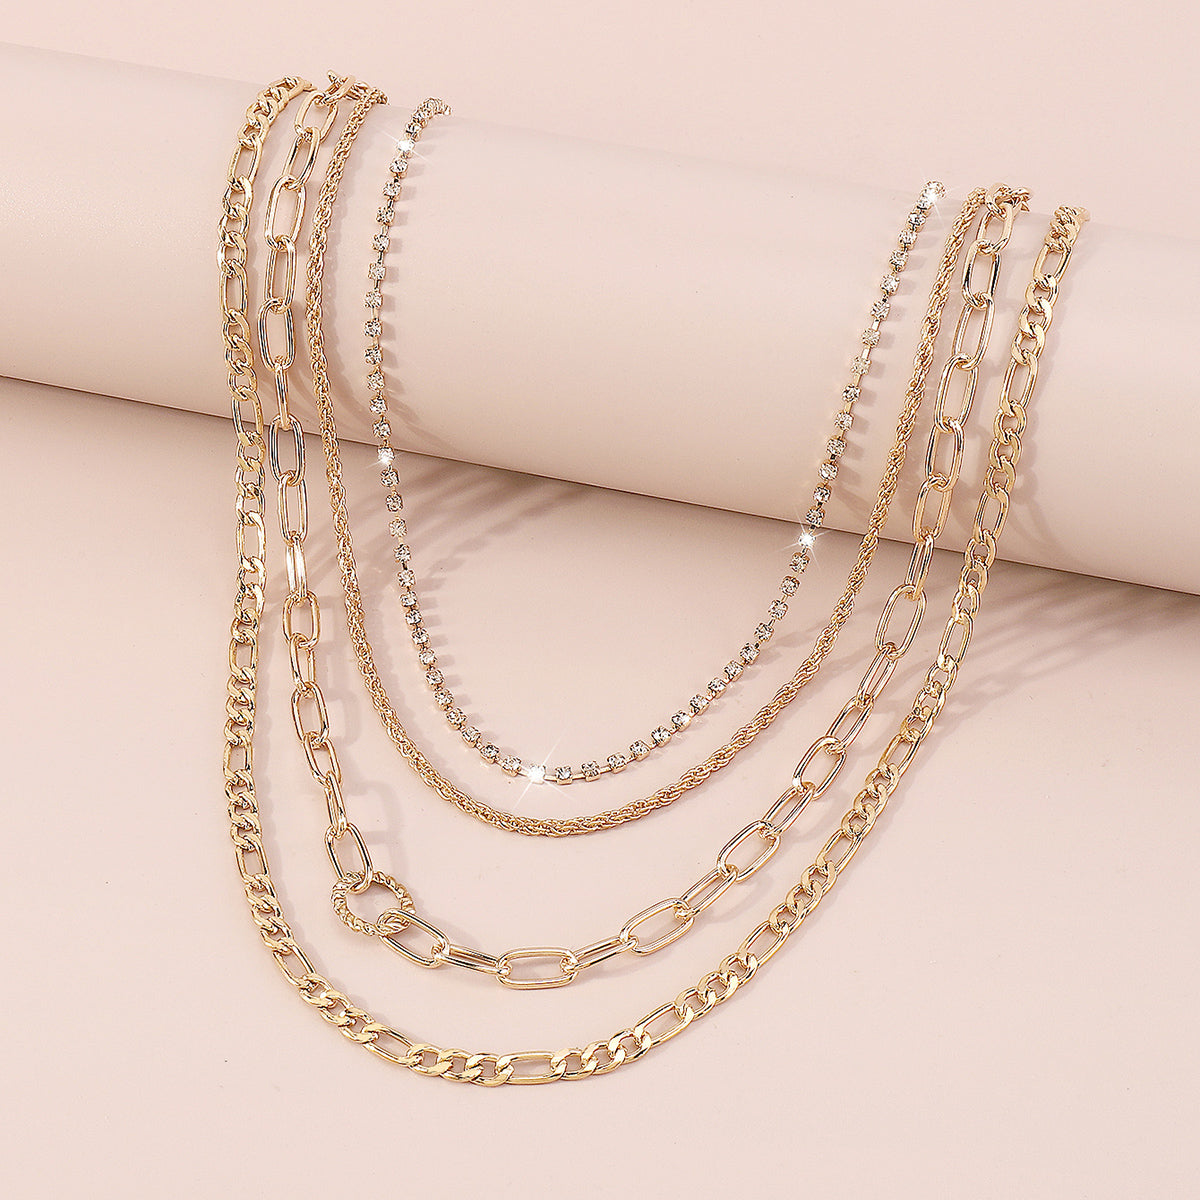 Gold Silver Color Cuban Link Chain Necklace medyjewelry